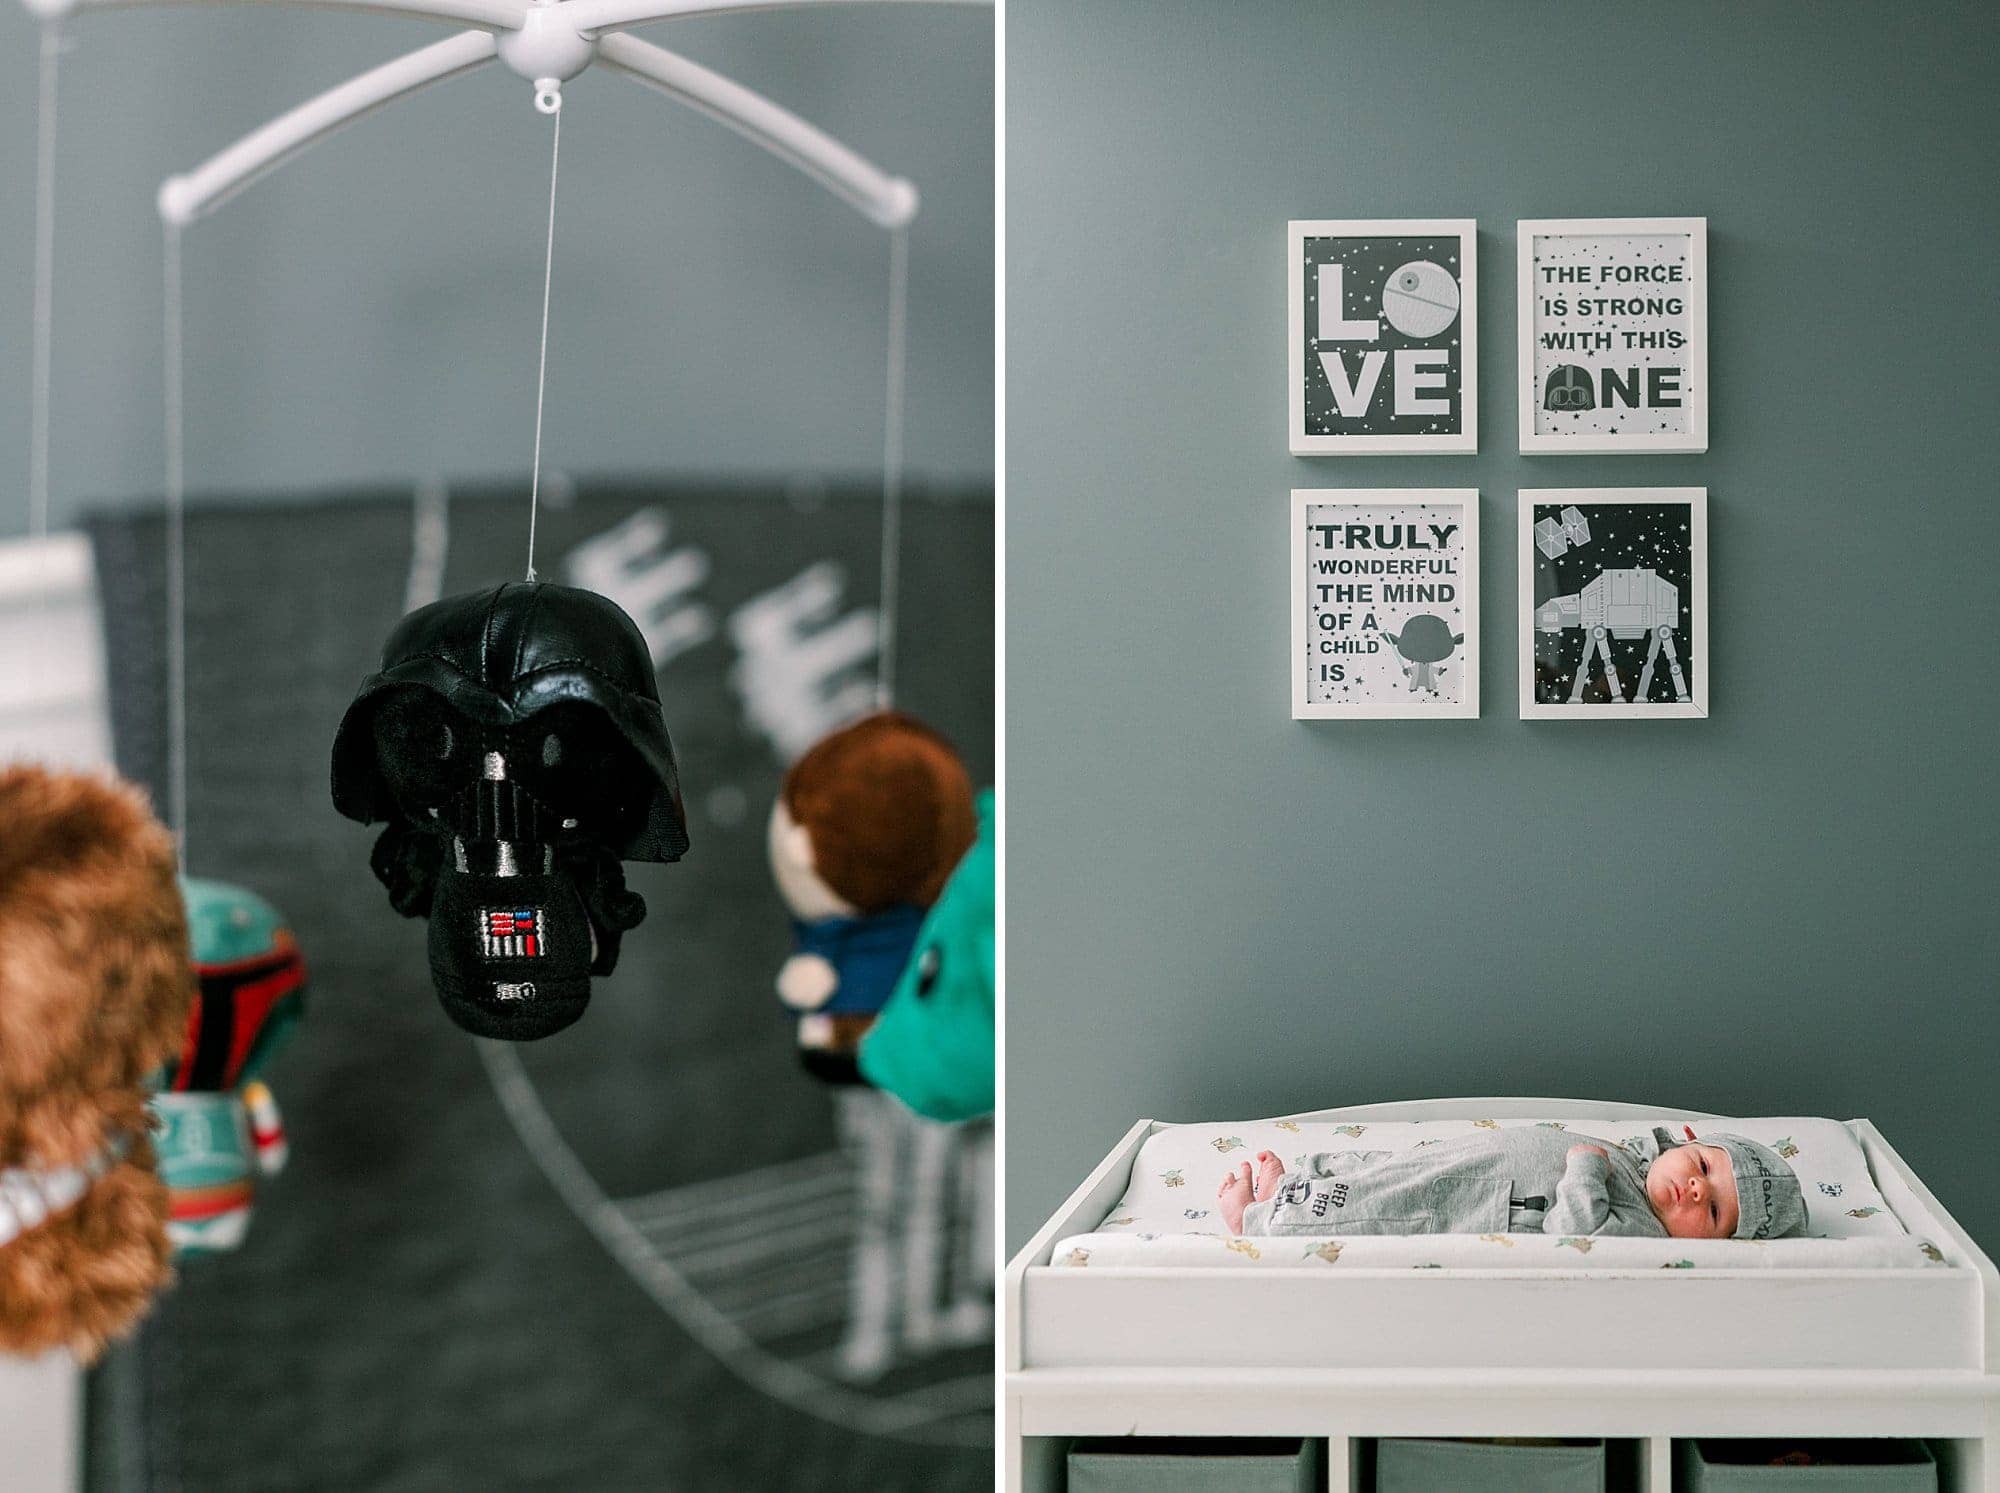 star wars nursery - mobile with baby darth vader, framed star wars quotes and photos over changing table